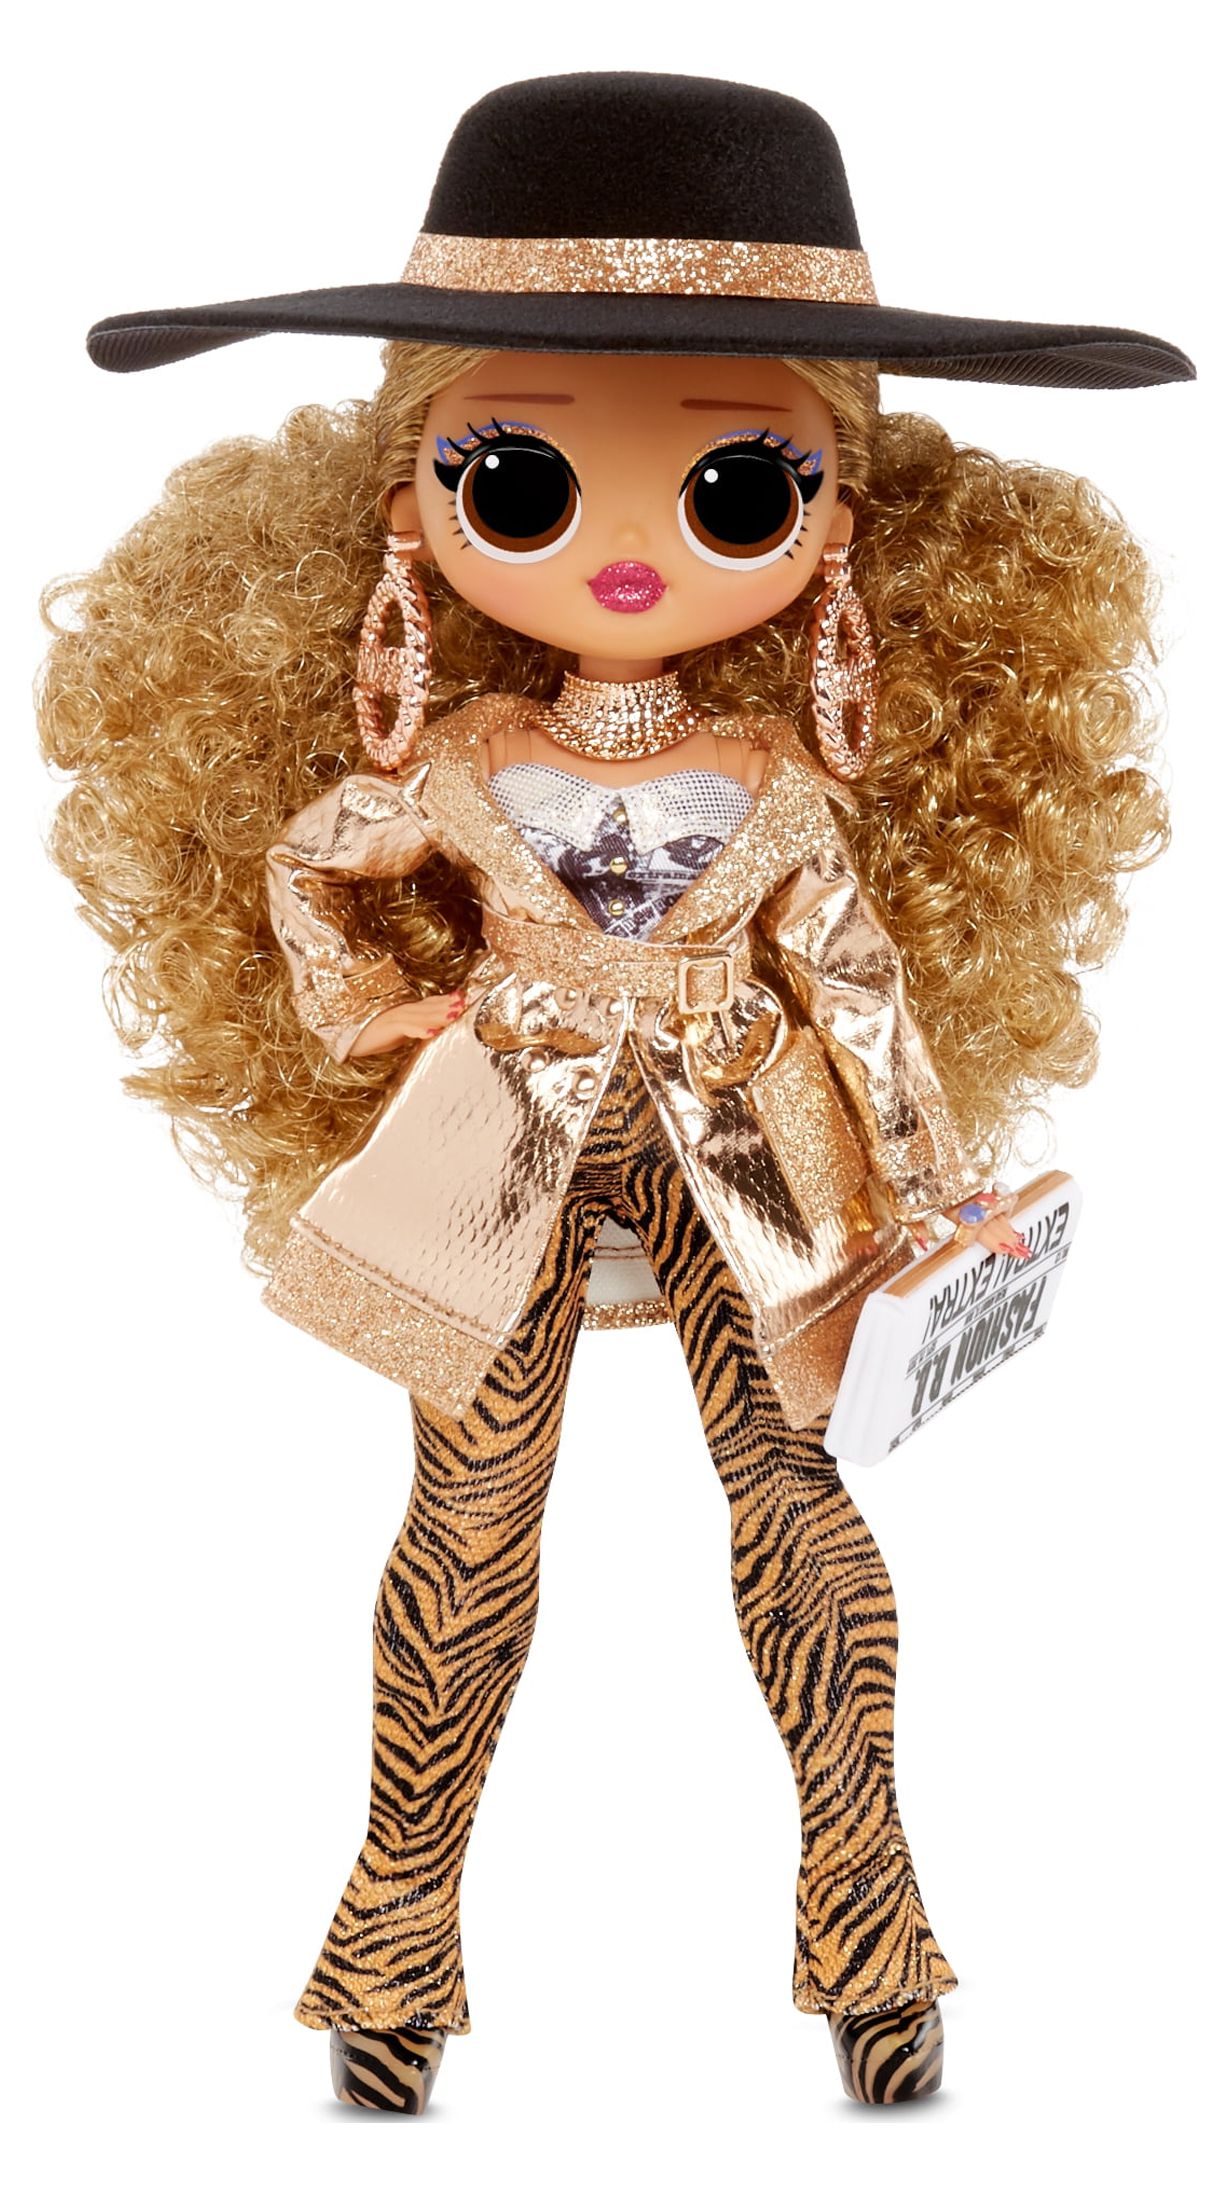 LOL Surprise OMG 2-Pack – Da Boss & Class Prez Fashion Dolls 2-Pack with 20 Surprises Each, Stylish Fashion Outfits and Doll Accessories - image 4 of 8